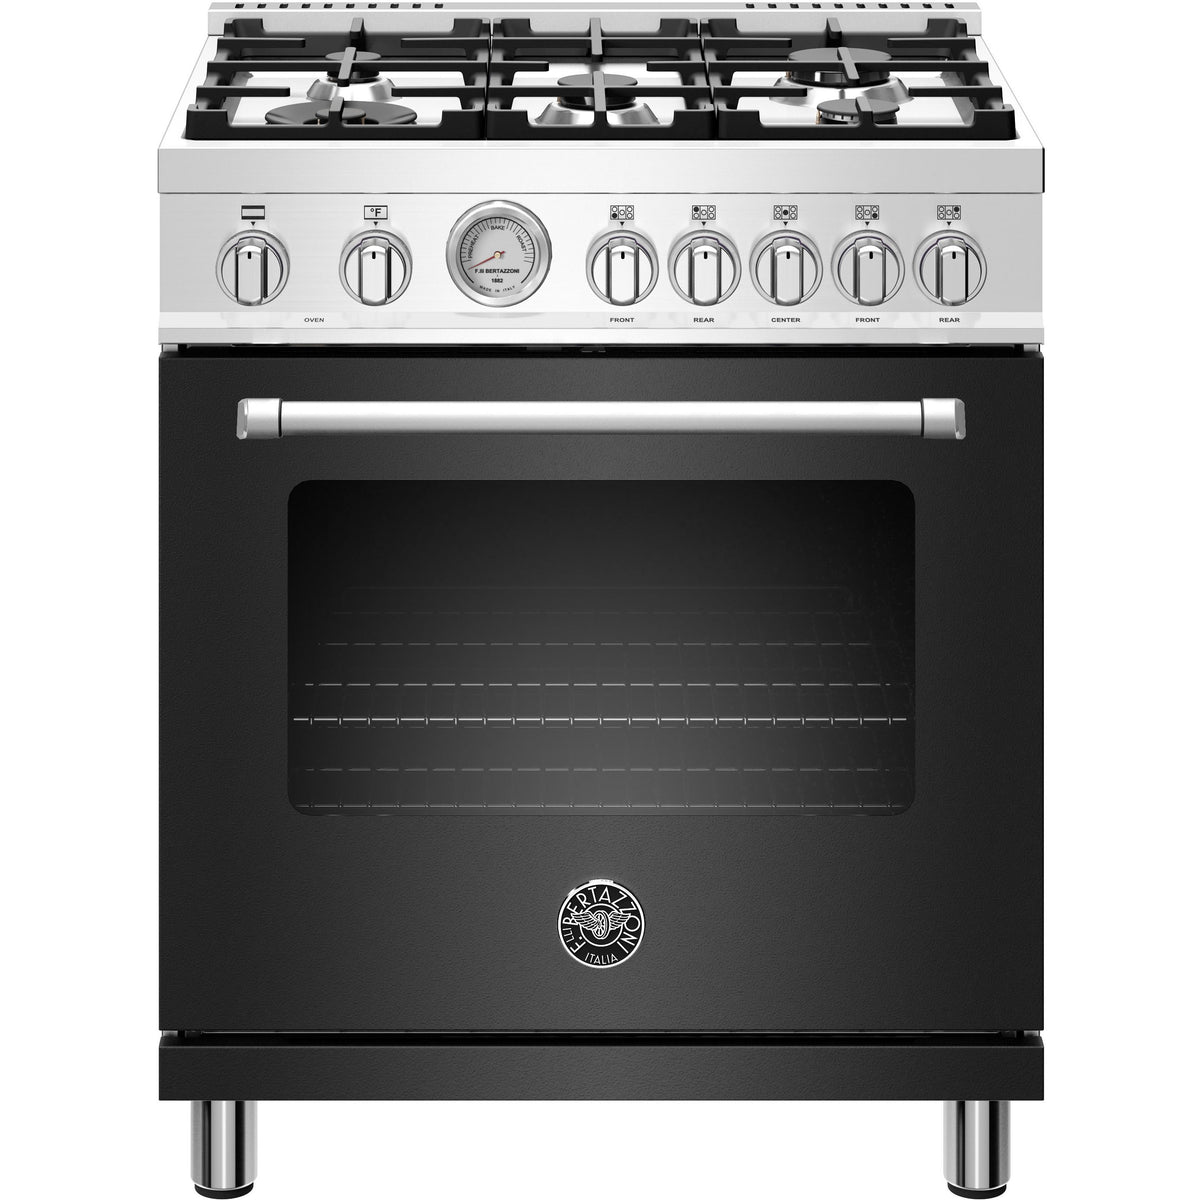 30-inch Freestanding Dual-Fuel Range with Convection Technology MAST305DFMNEE IMAGE 1